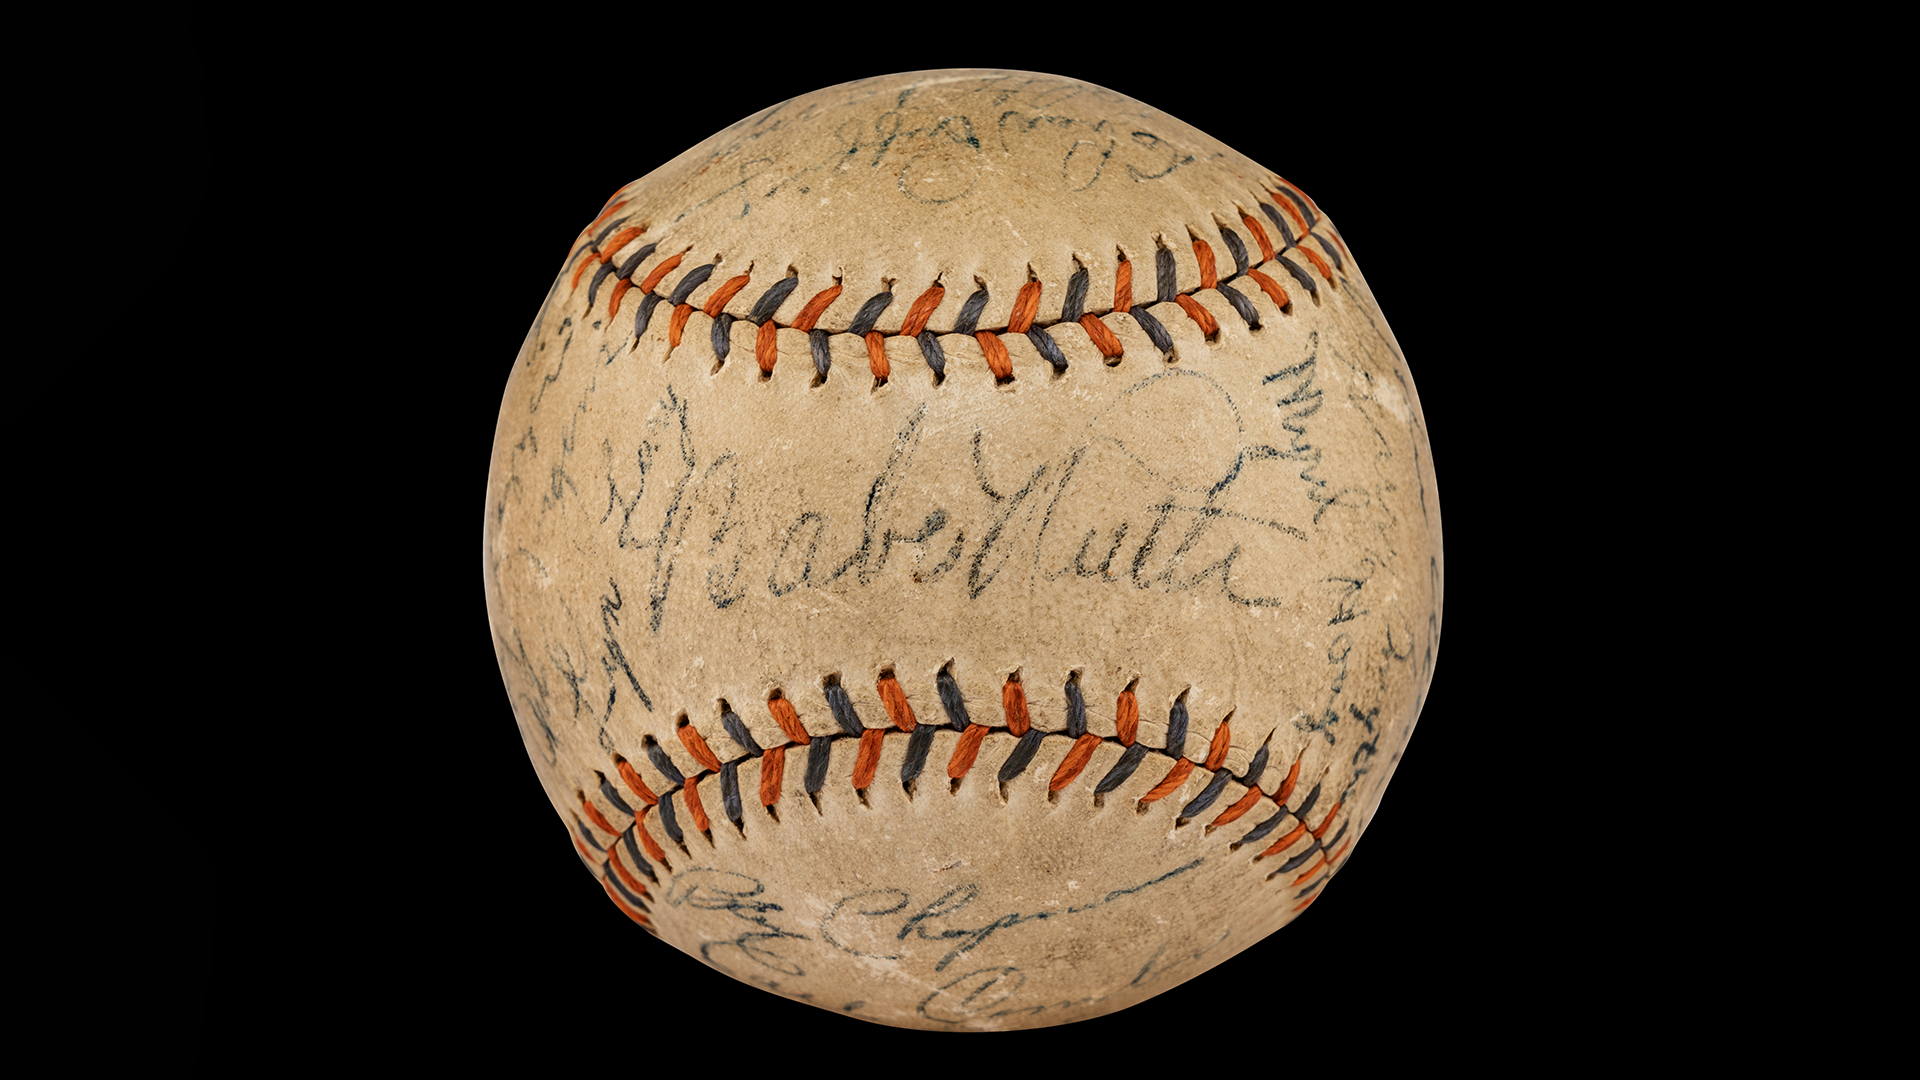 Autographed Sports Memorabilia Collection, Address Provided to